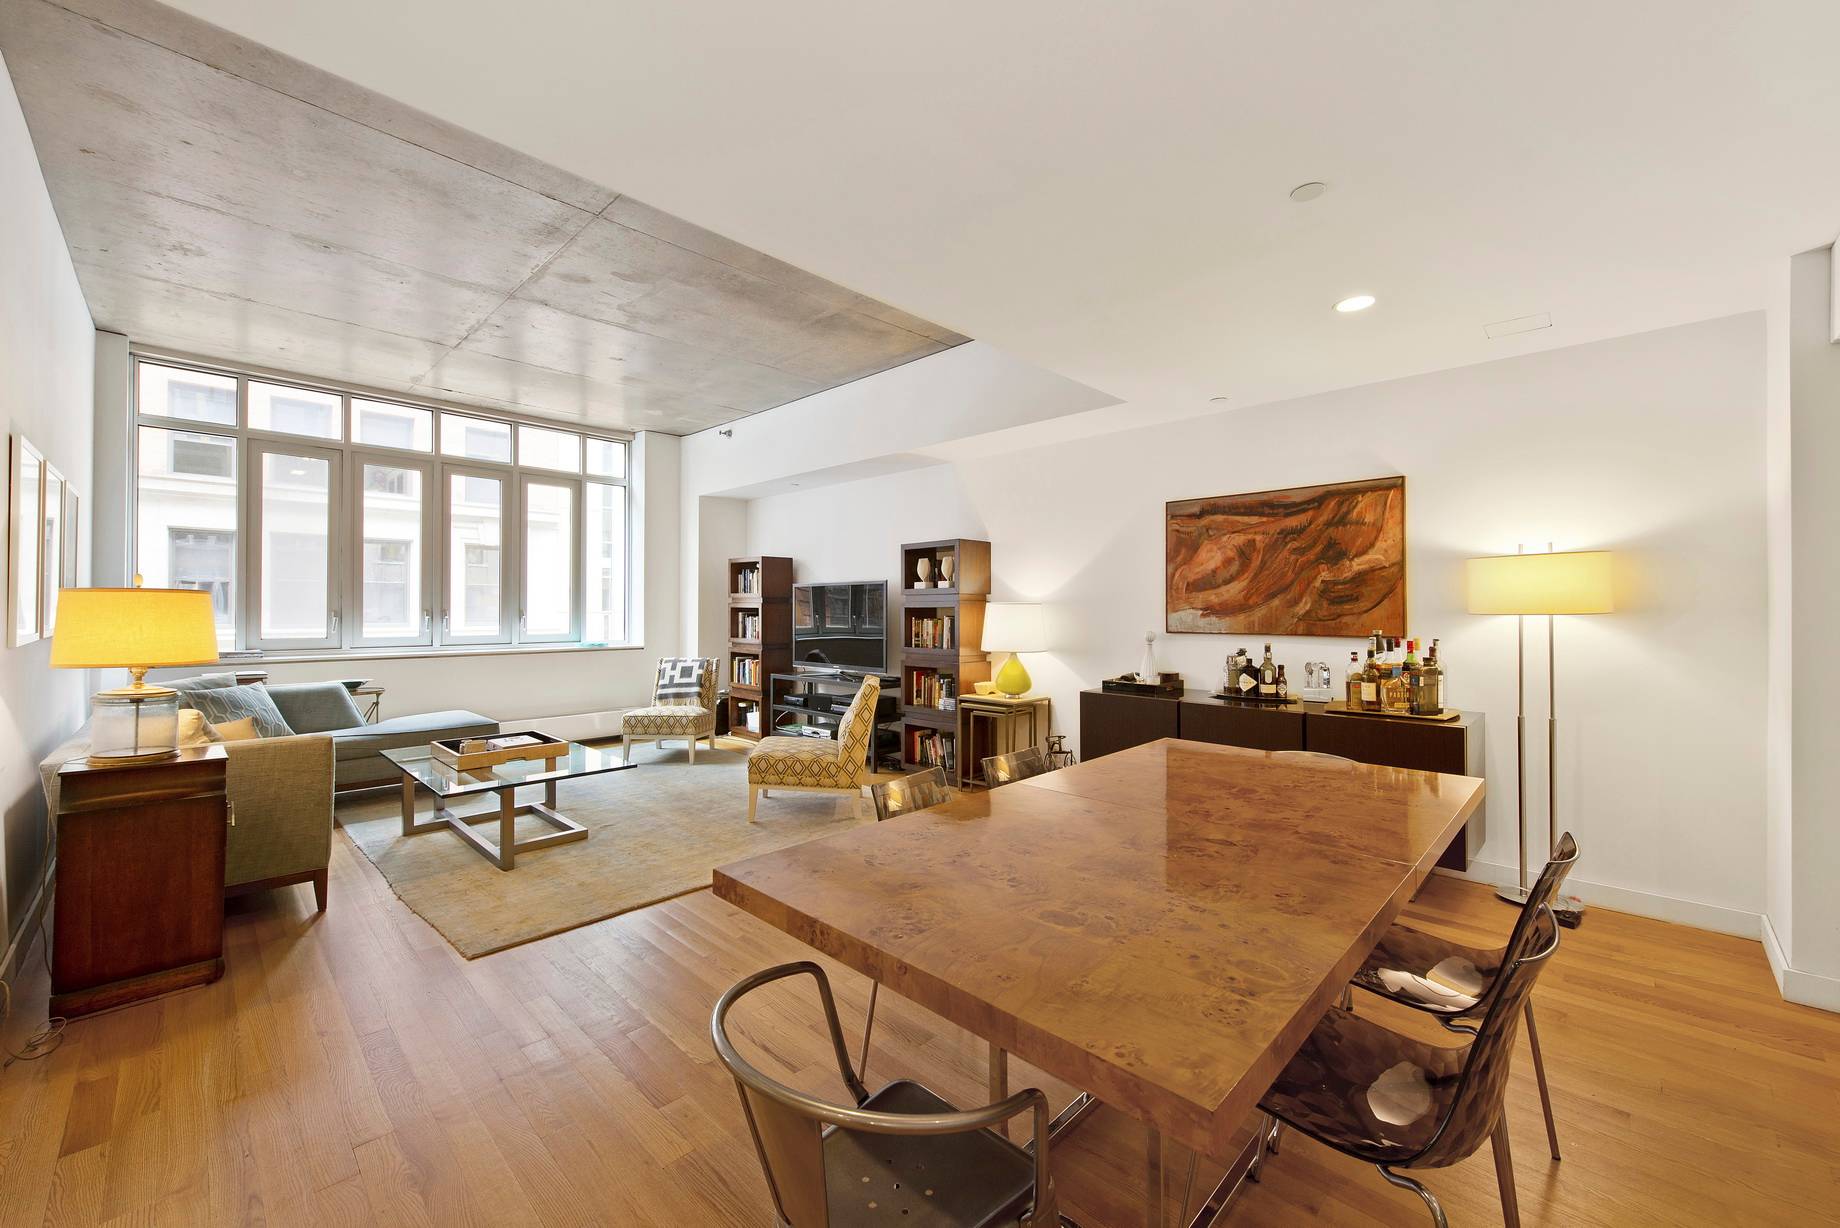 246 WEST 17TH STREET  |  FABULOUS TWO BEDROOM  |  PRIME CHELSEA BOUTIQUE CONDO RENTAL